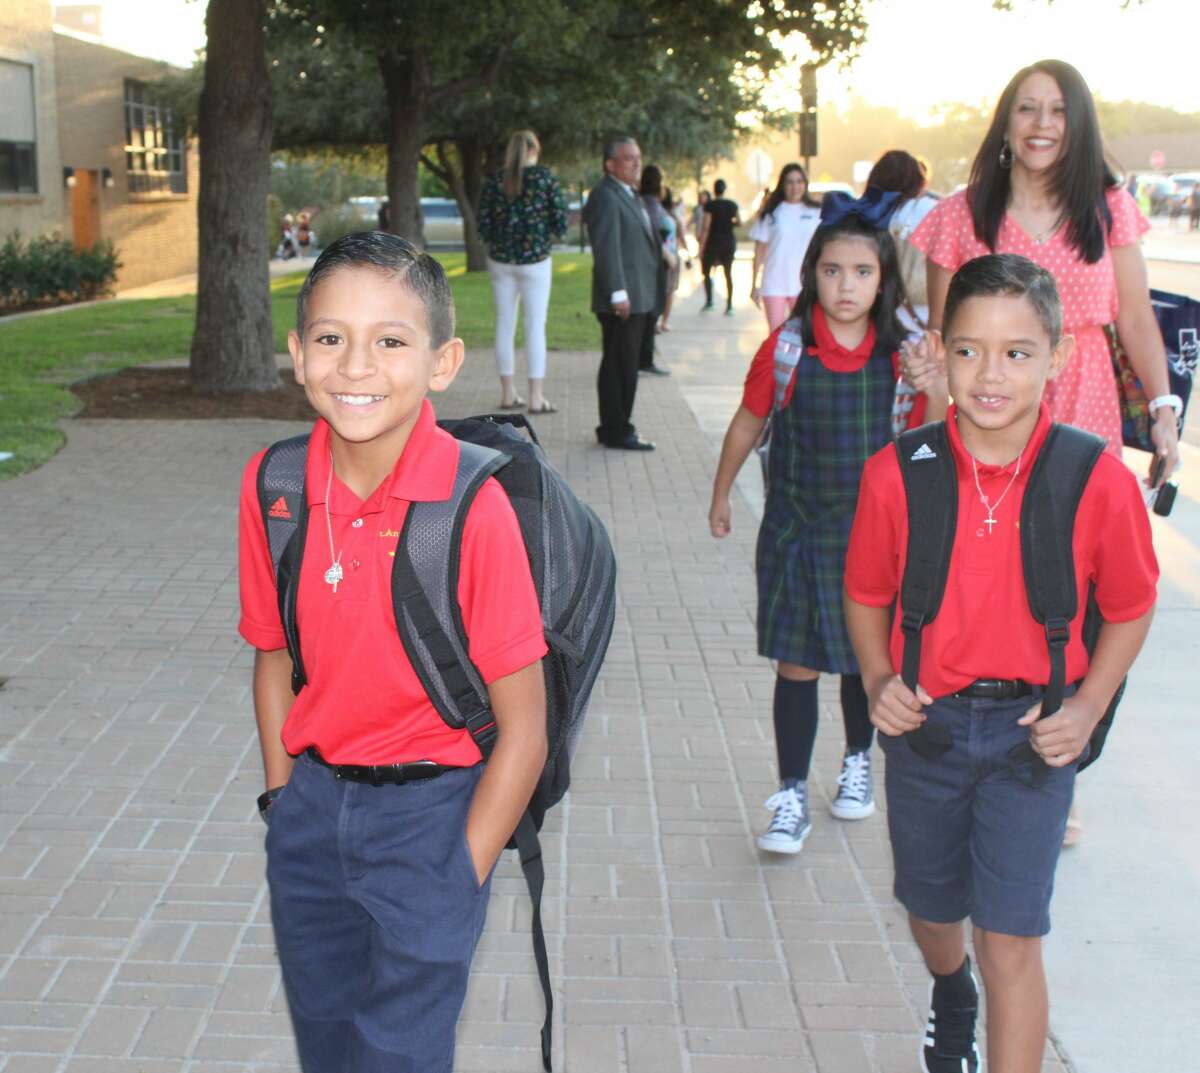 St. Ann's students return for the 2019-2020 school year.